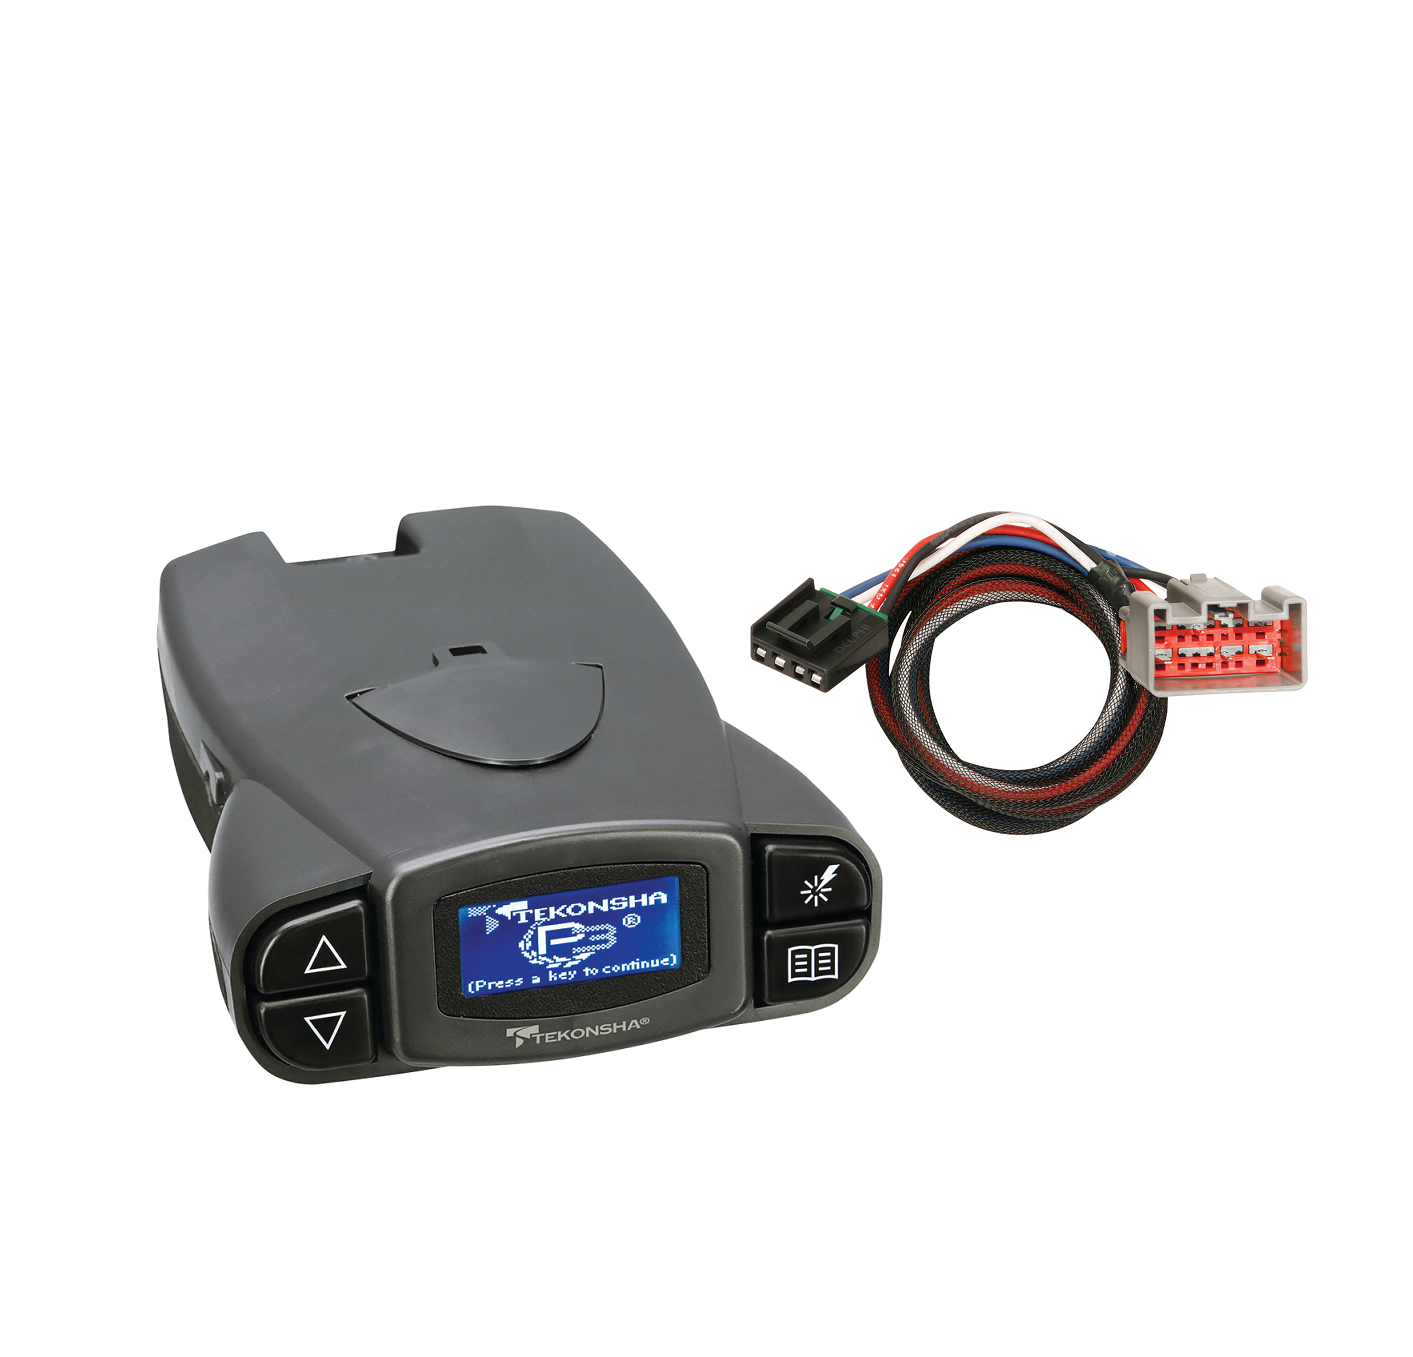 2012-2019 Lincoln MKT 3036 Tekonsha Prodigy P3 Proportional Brake Controller for Trailers with 1-4 Axles 90195 w/ Plug-N-Play Wire